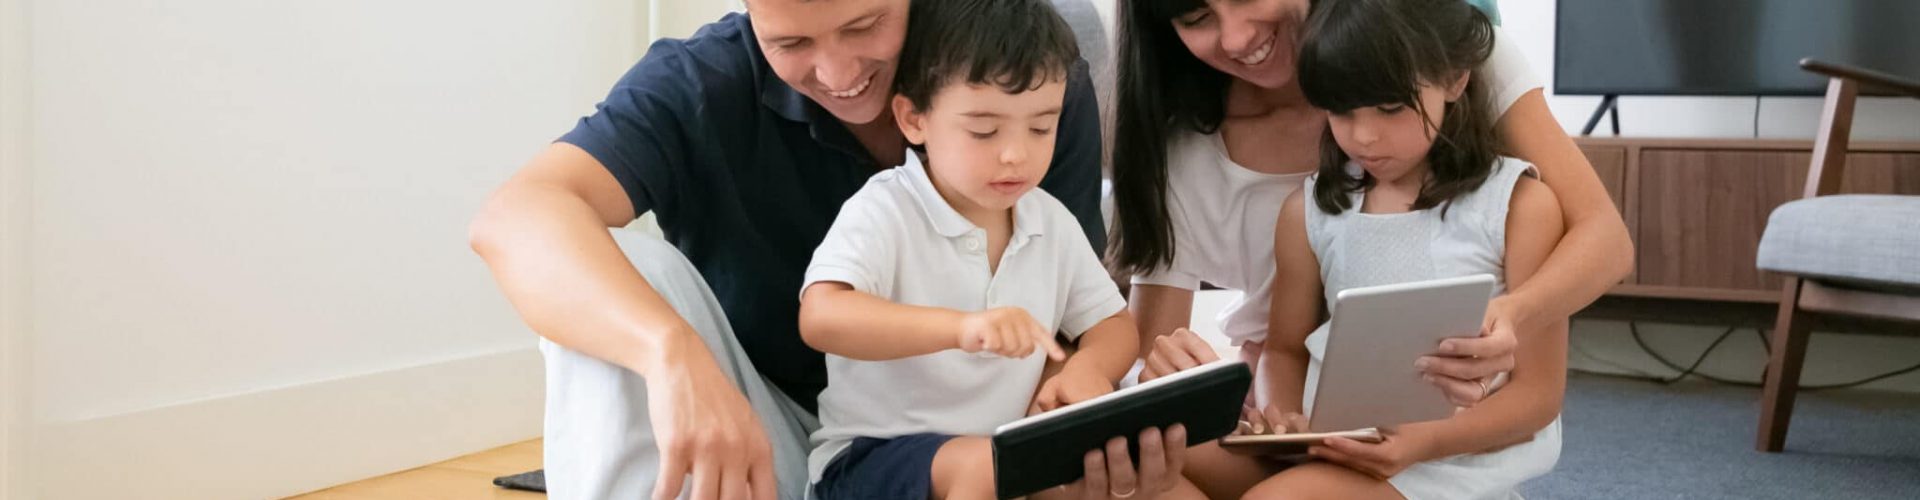 Happy parents and cute kids using mobile devices on floor in living room. Pretty mother and father hugging children with tablets and smartphone and smiling. Family and digital technology concept